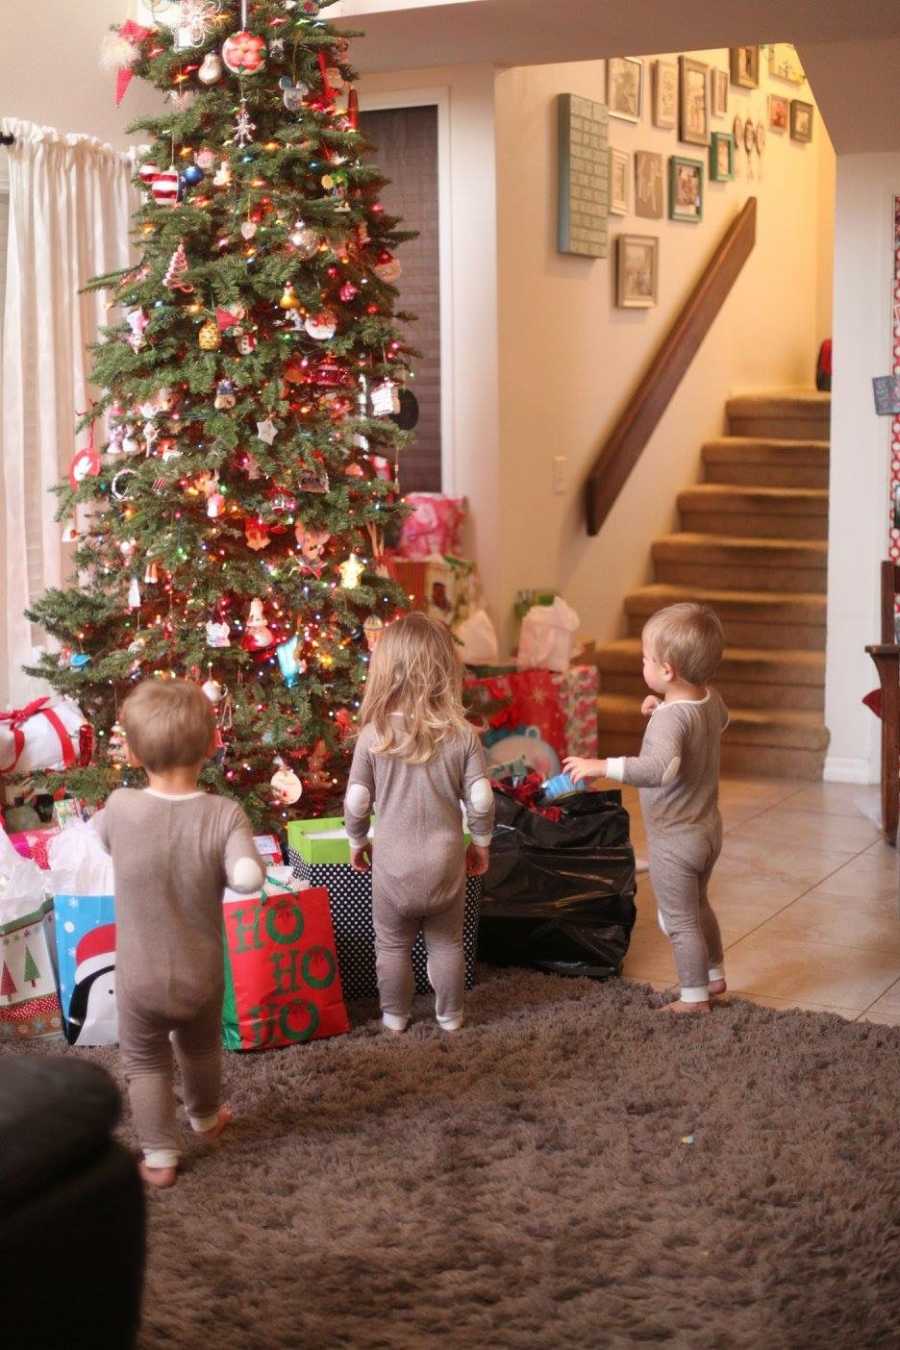 Triplets standing in matching onesies beside Christmas presents and tree in home